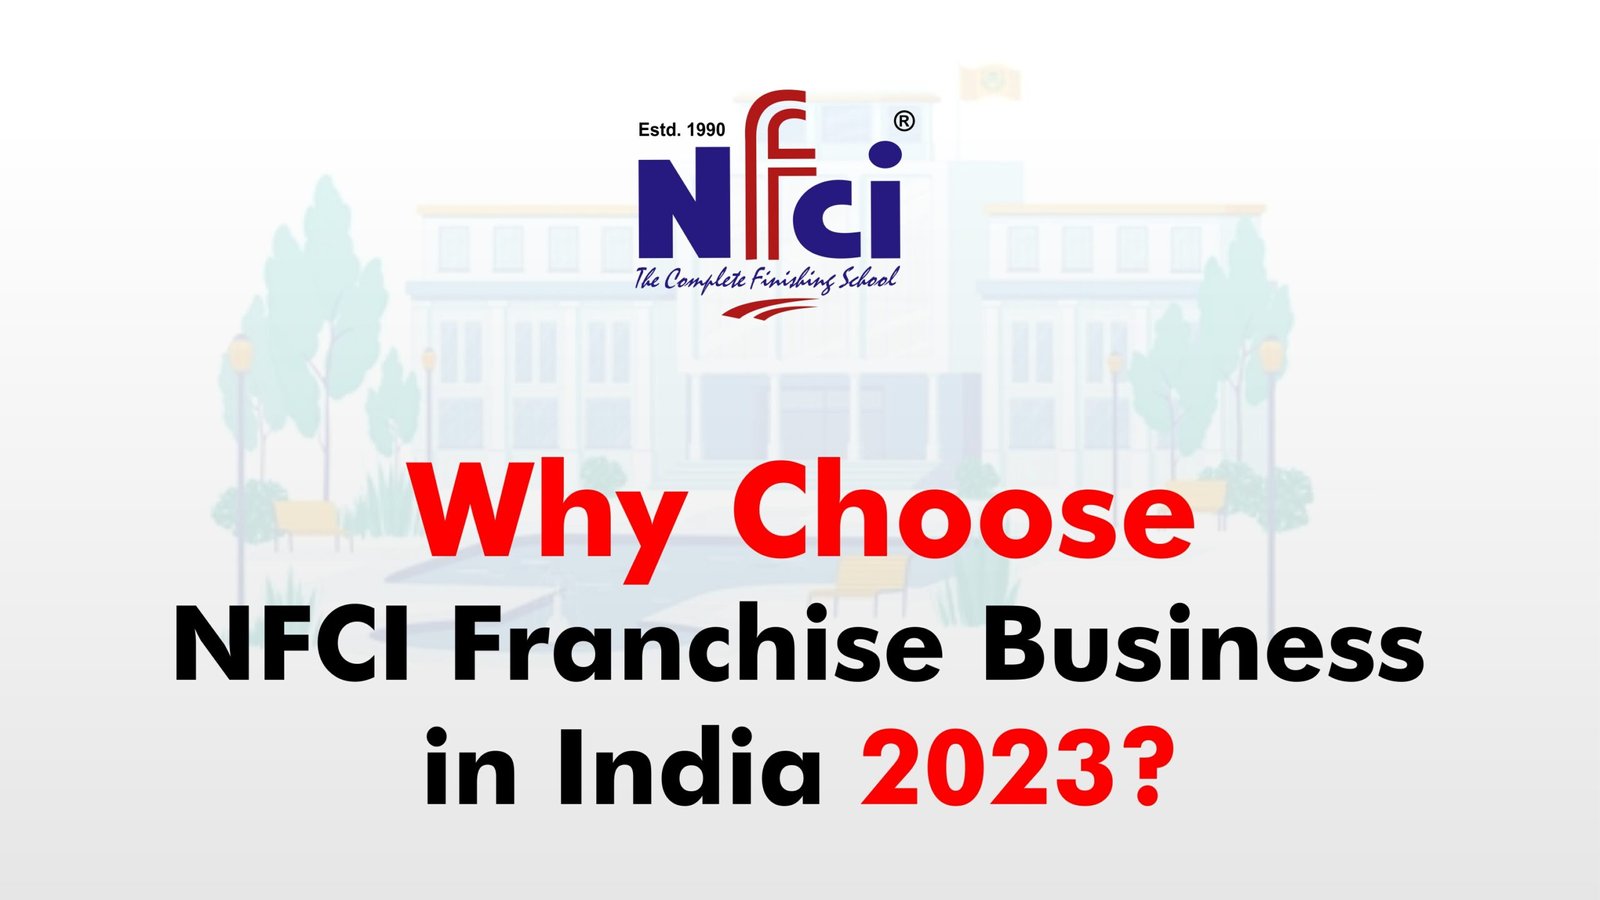 NFCI Franchise in India